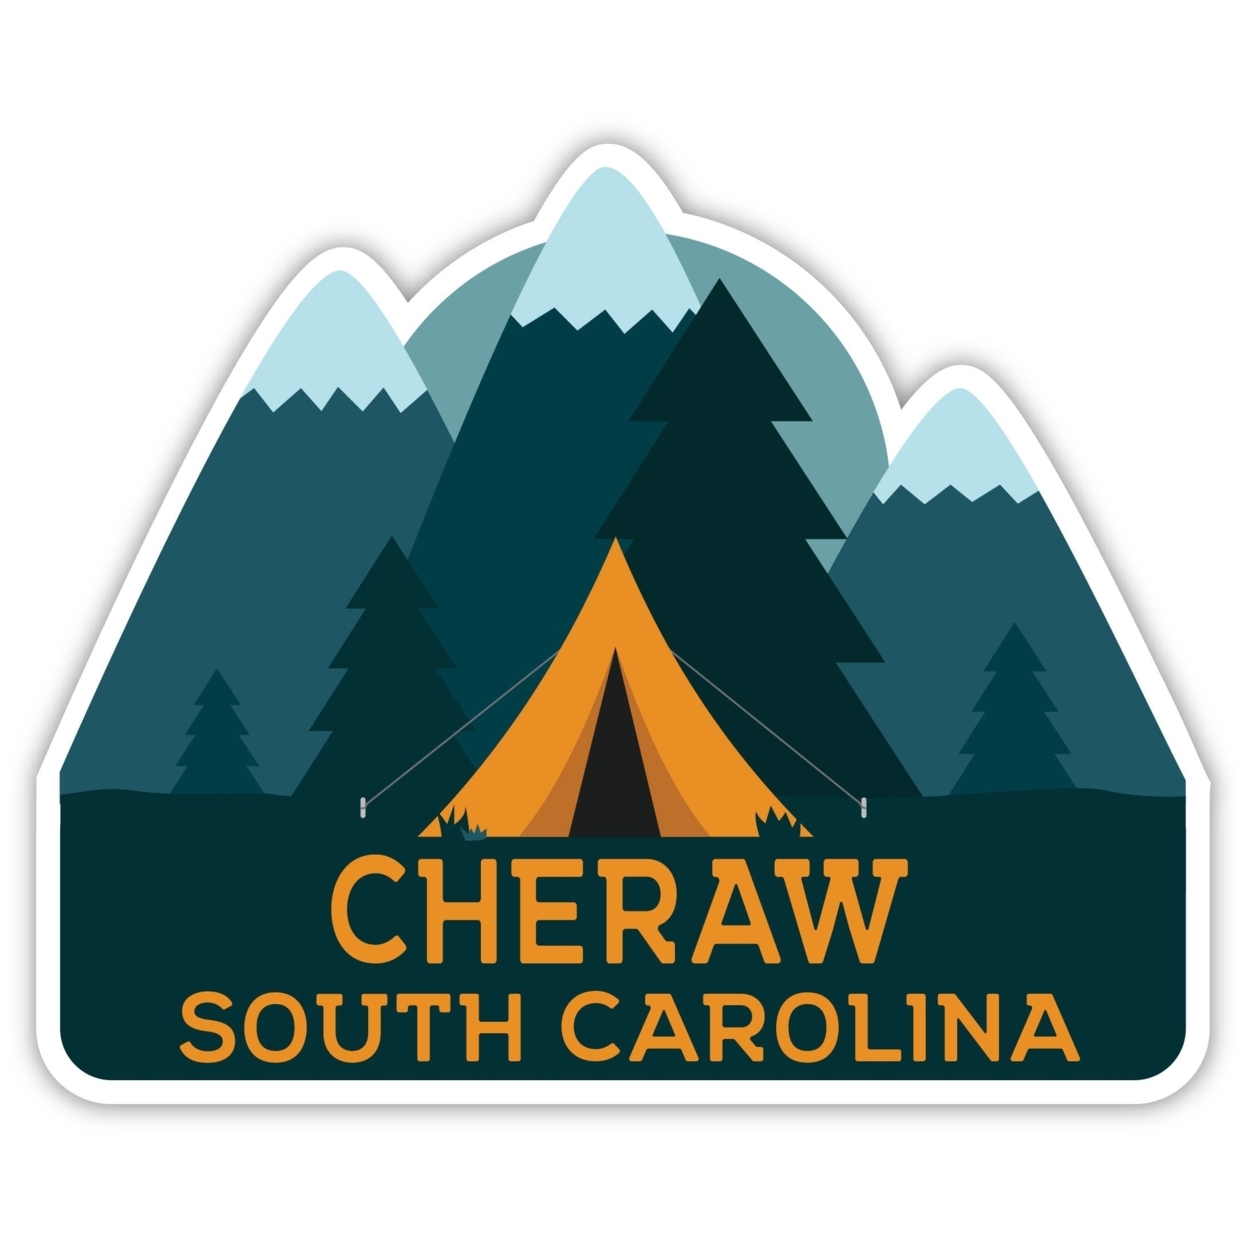 Cheraw South Carolina Souvenir Decorative Stickers (Choose Theme And Size) - 4-Pack, 4-Inch, Tent